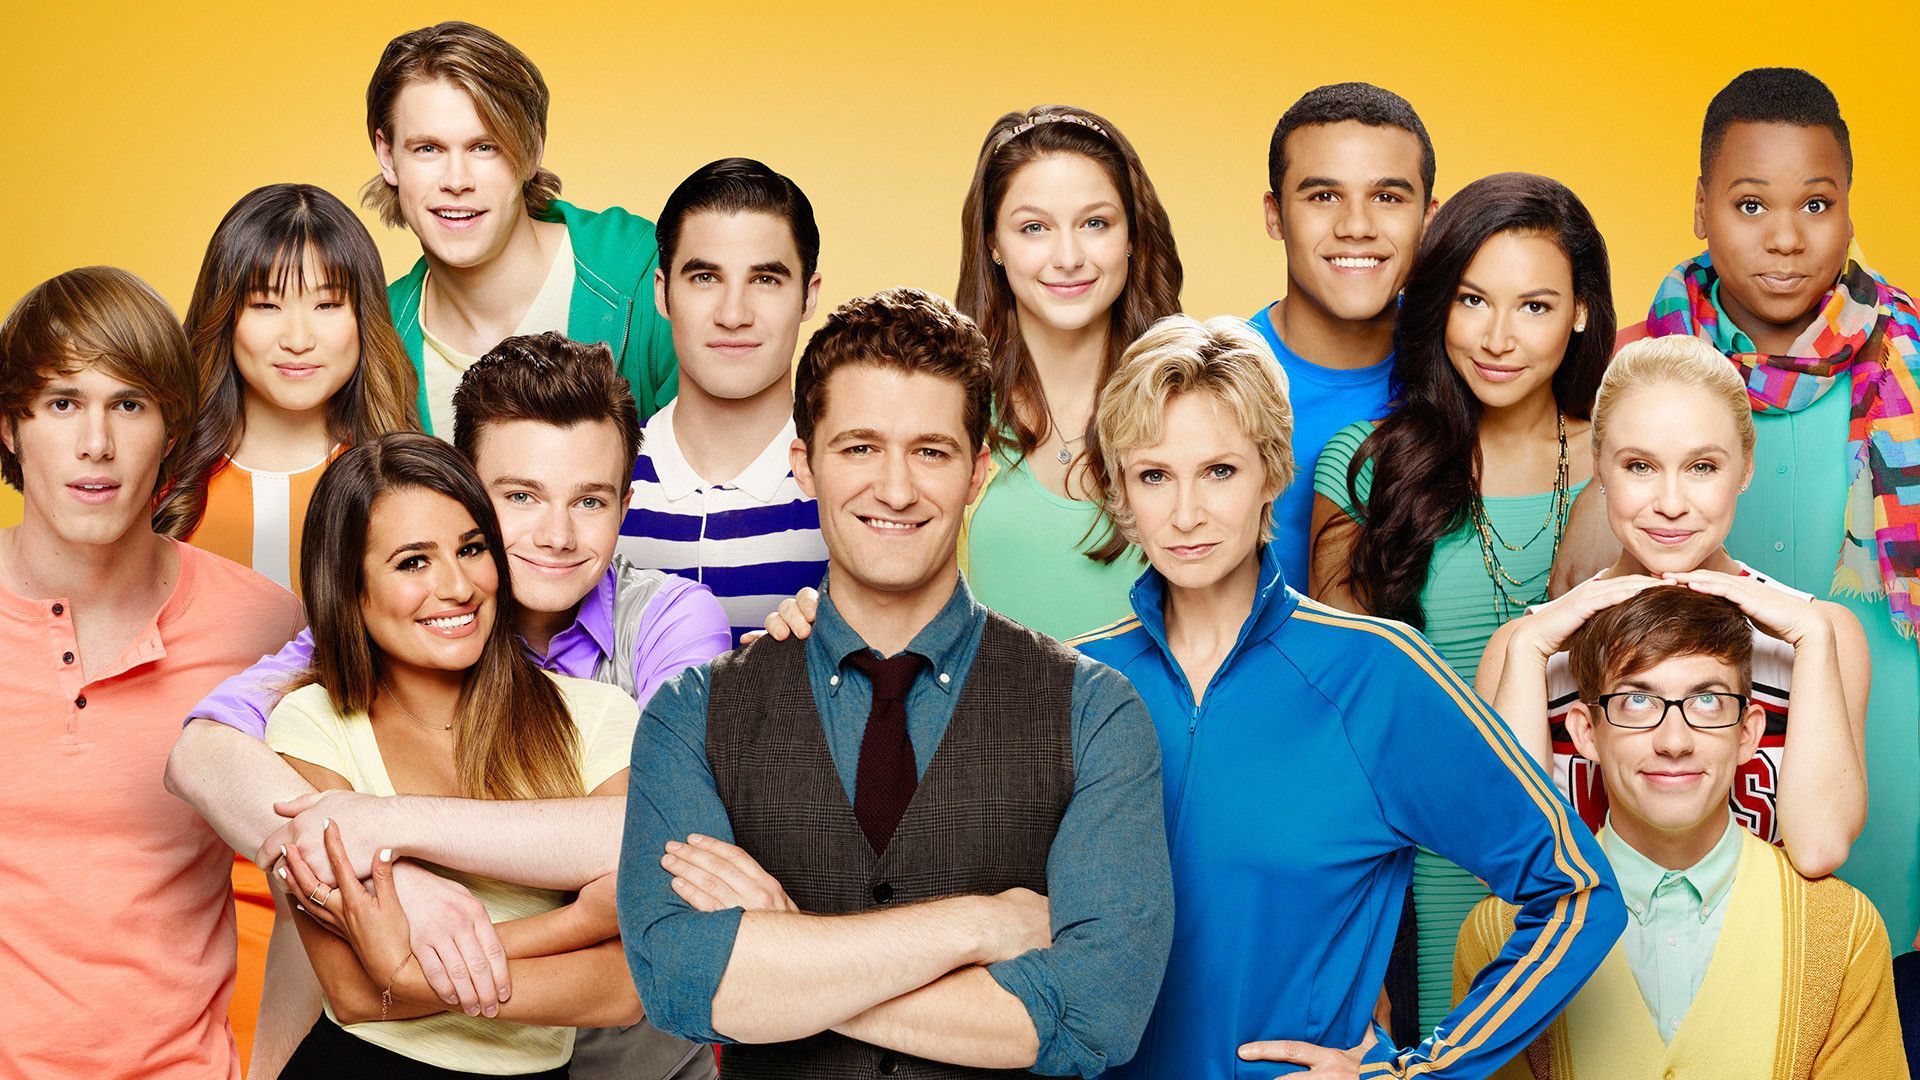 Glee Characters Wallpapers Wallpaper Cave